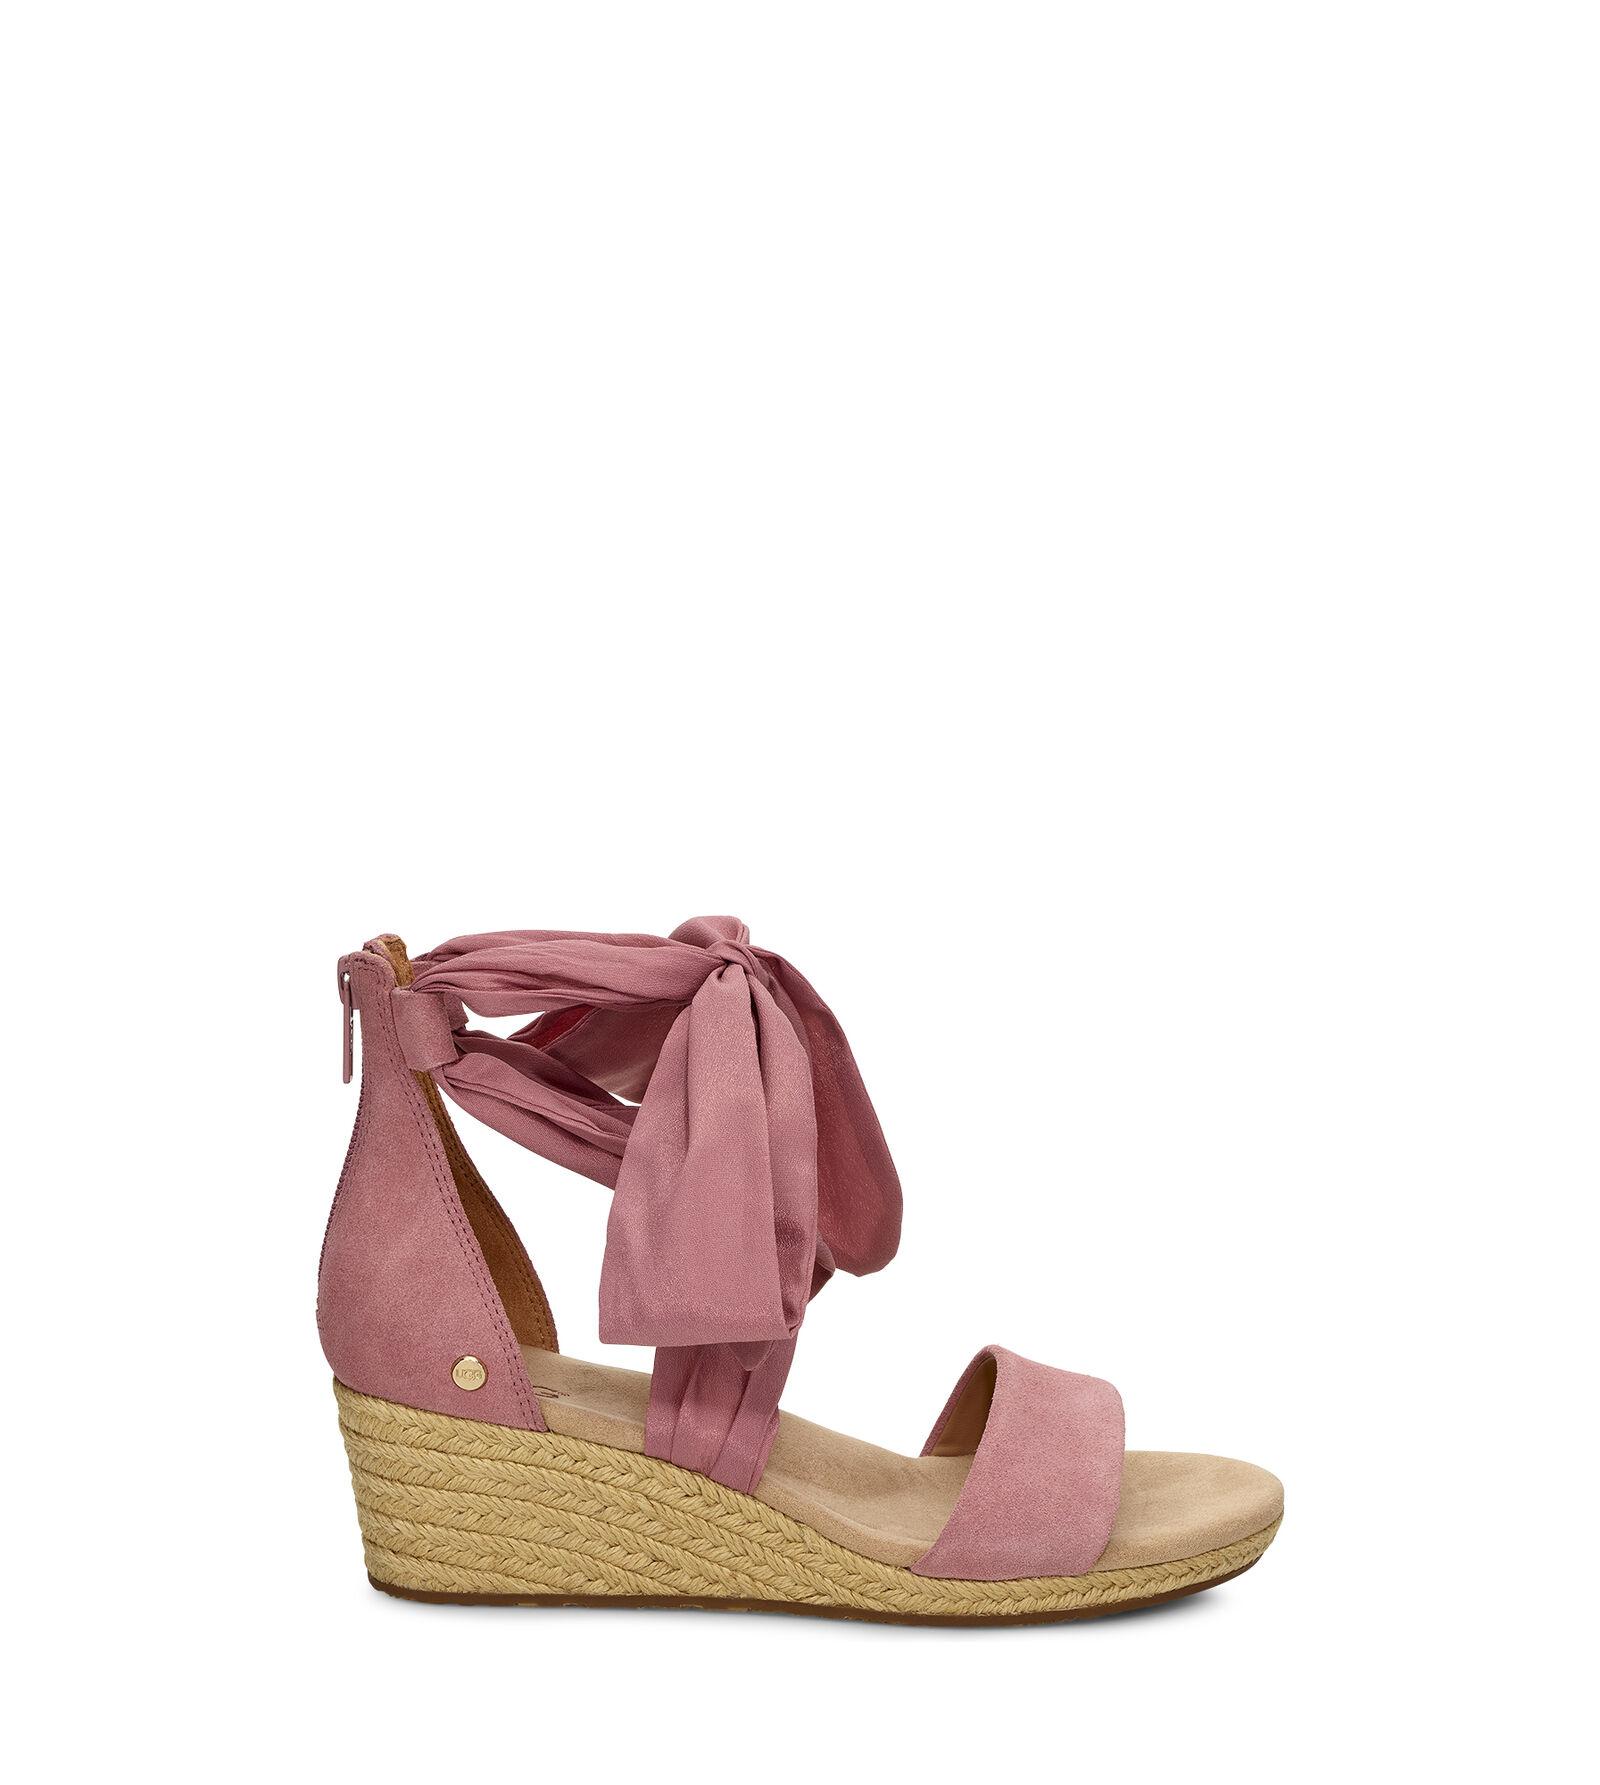 Ugg Wedge Sandals Trina Suede Textile Rose In Pink Lyst Uk